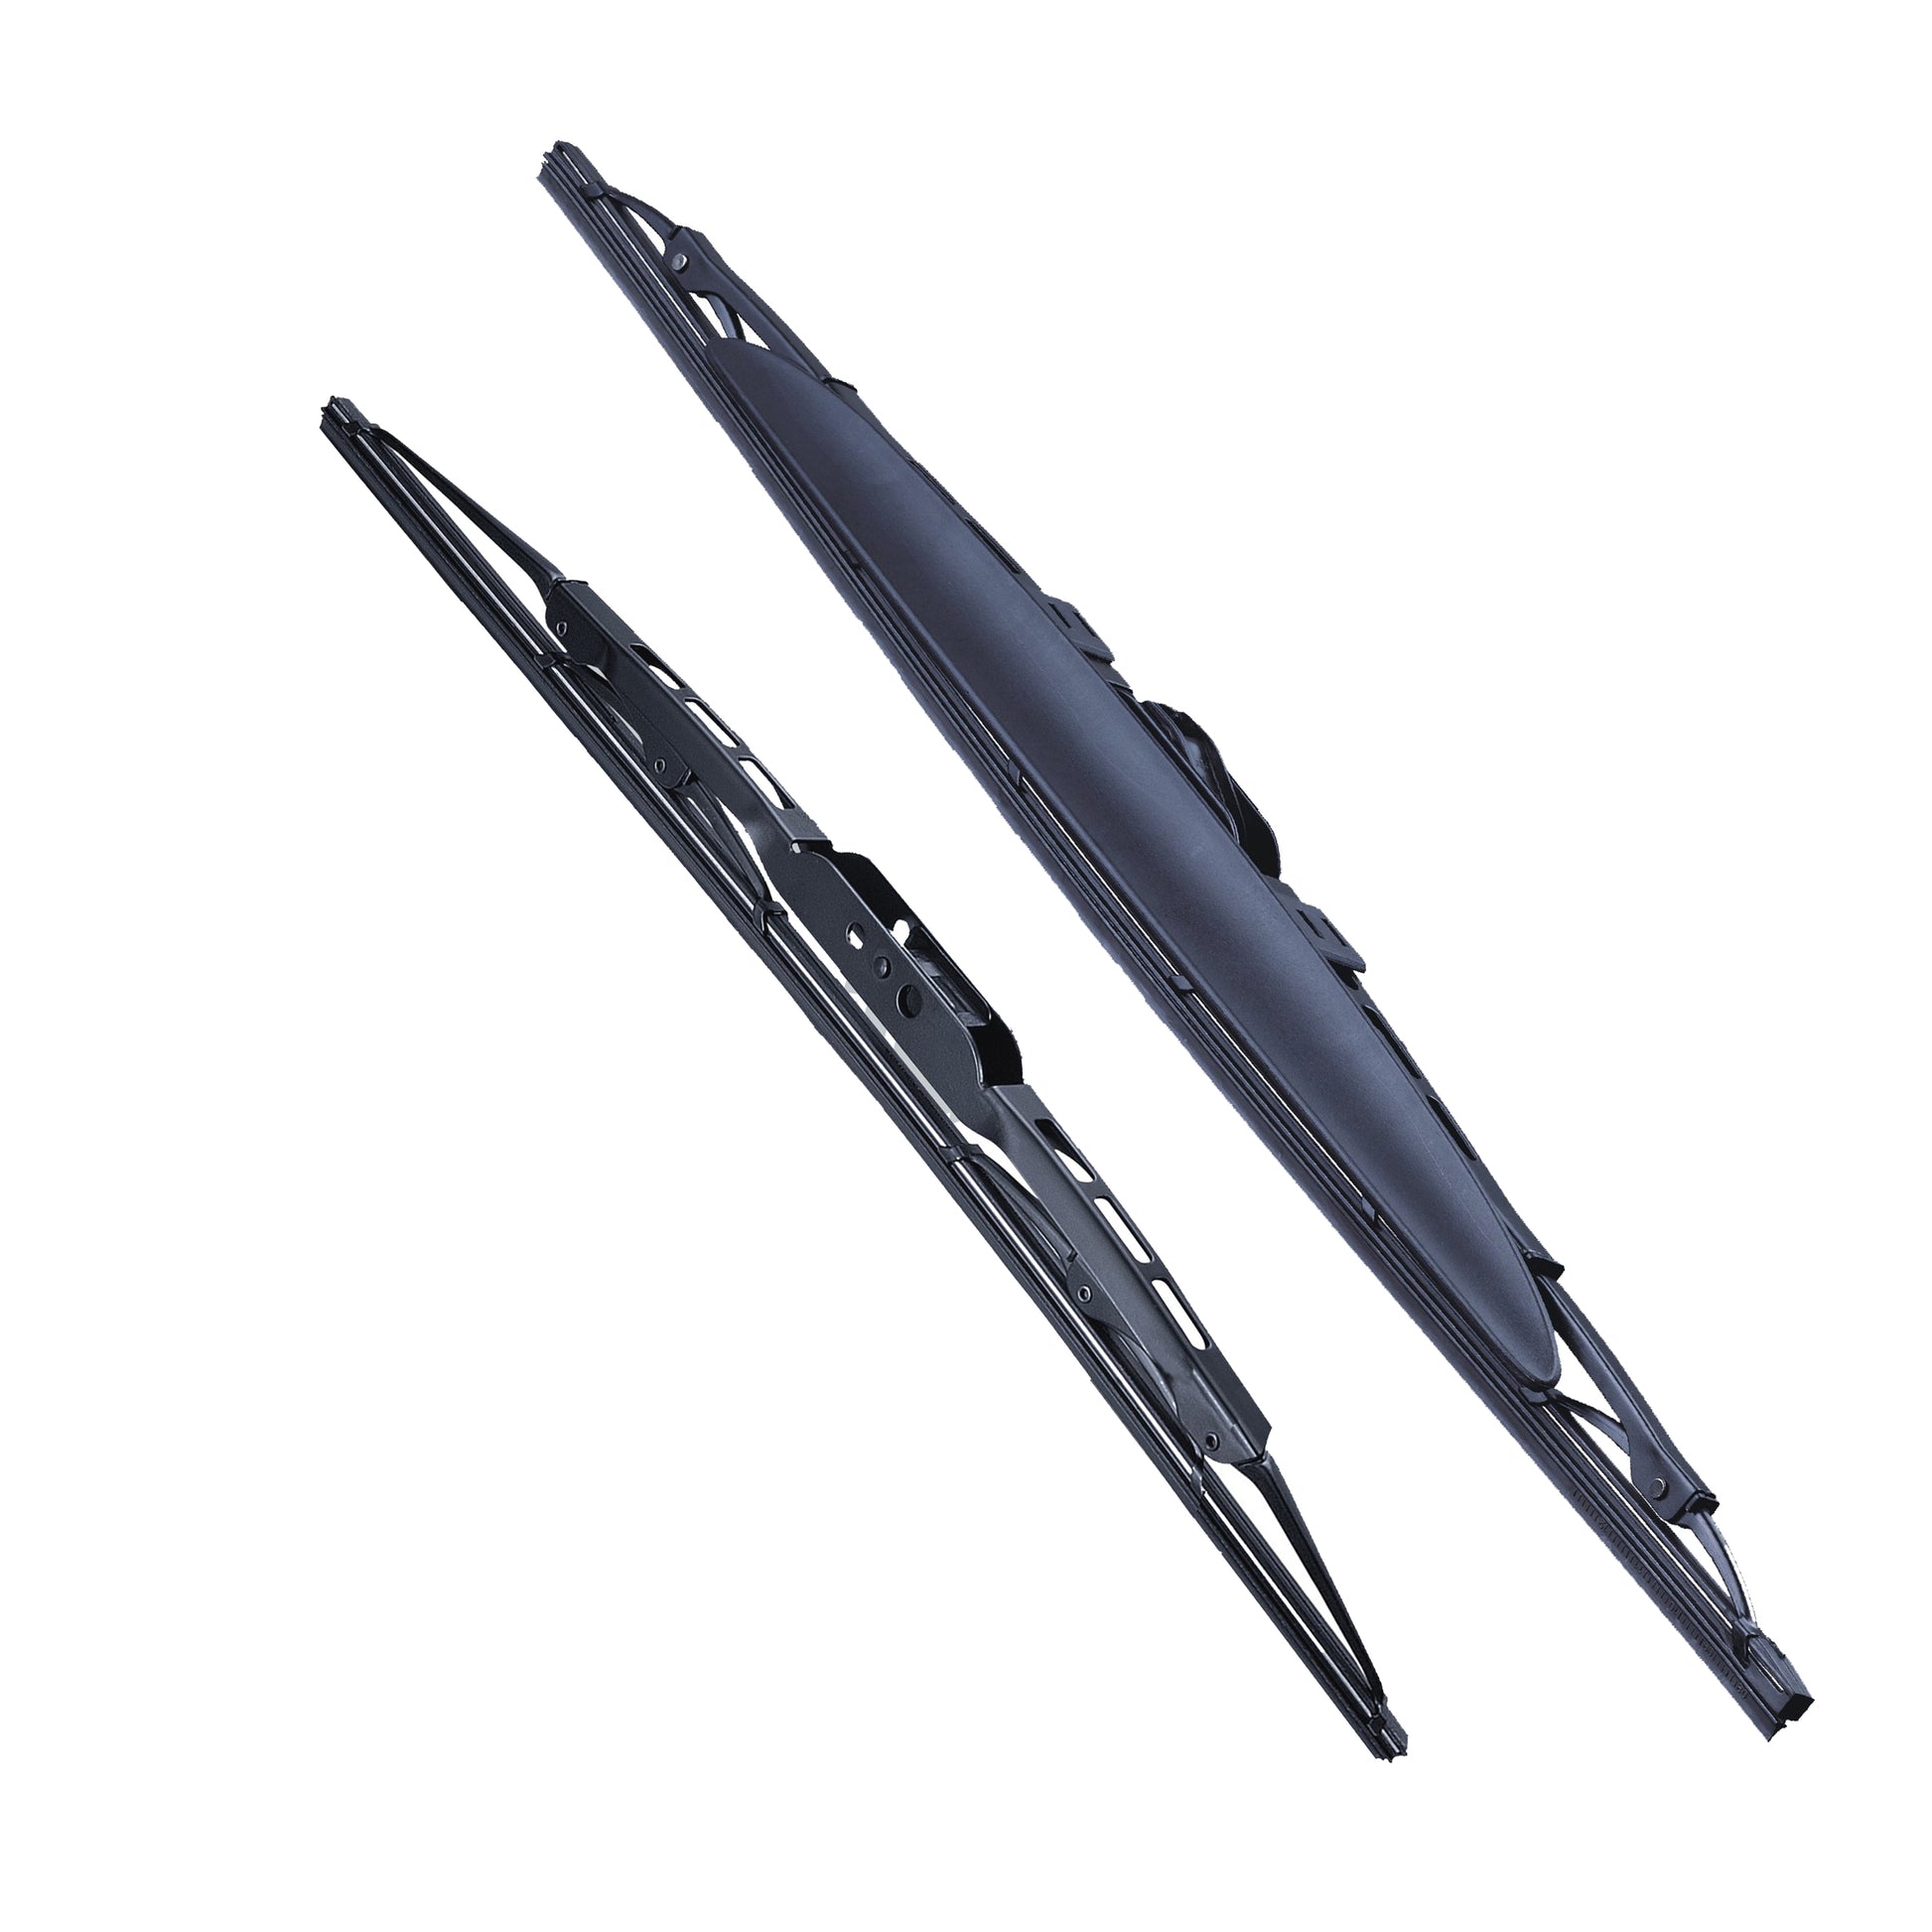 CITROEN DISPATCH Chassis Cab Dec 2003 to Feb 2017 Wiper Blade Kit